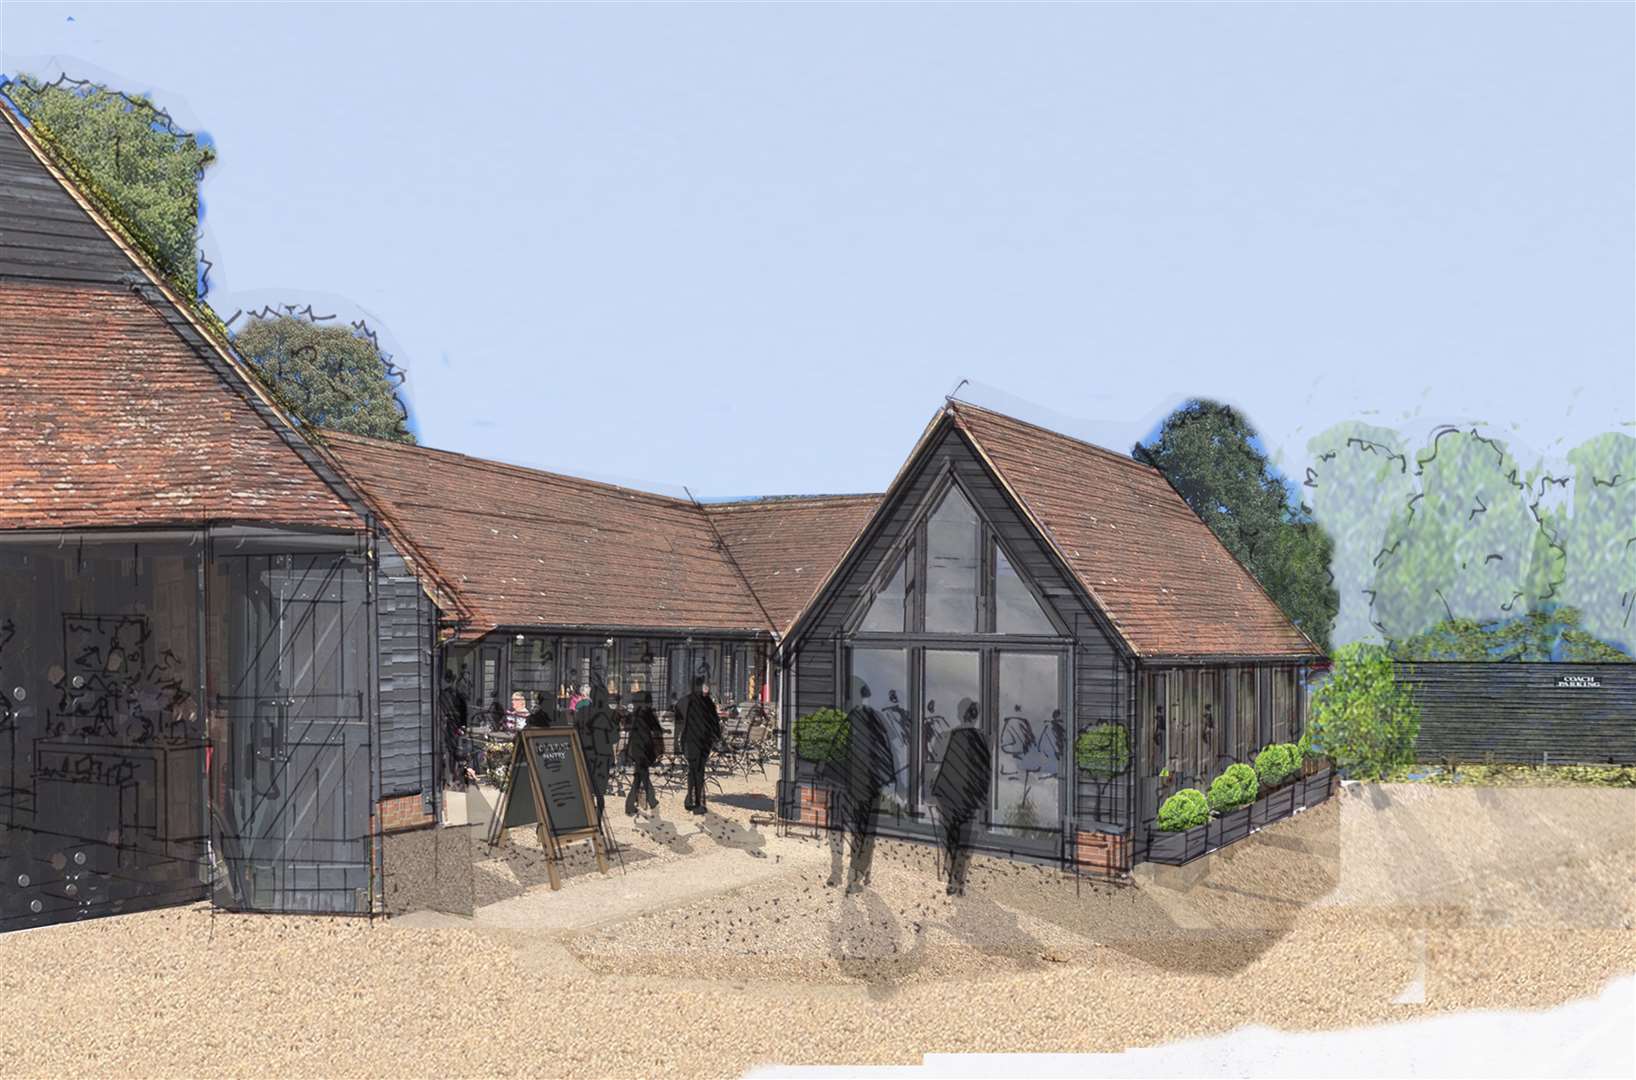 An artist's impression of the Porcupine Pantry extension at Penshurst Place and Gardens. Picture: Madgwick and Dottridge